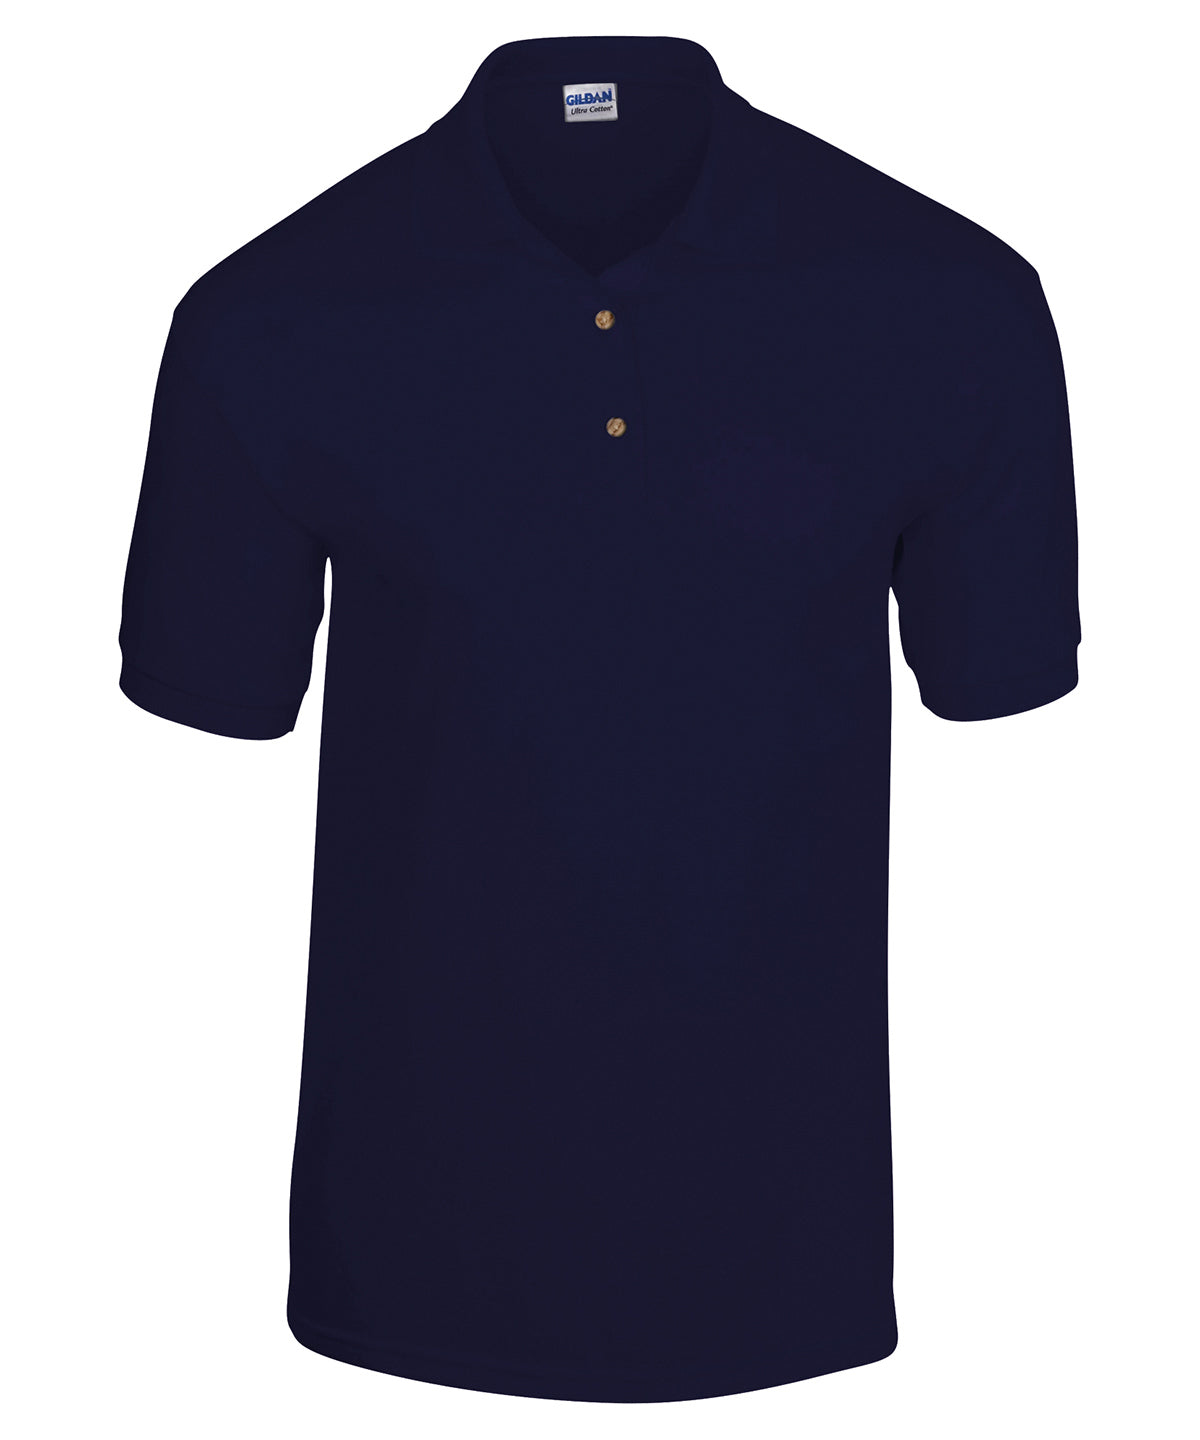 Personalised Polo Shirts - Mid Blue Gildan DryBlend® Jersey knit polo